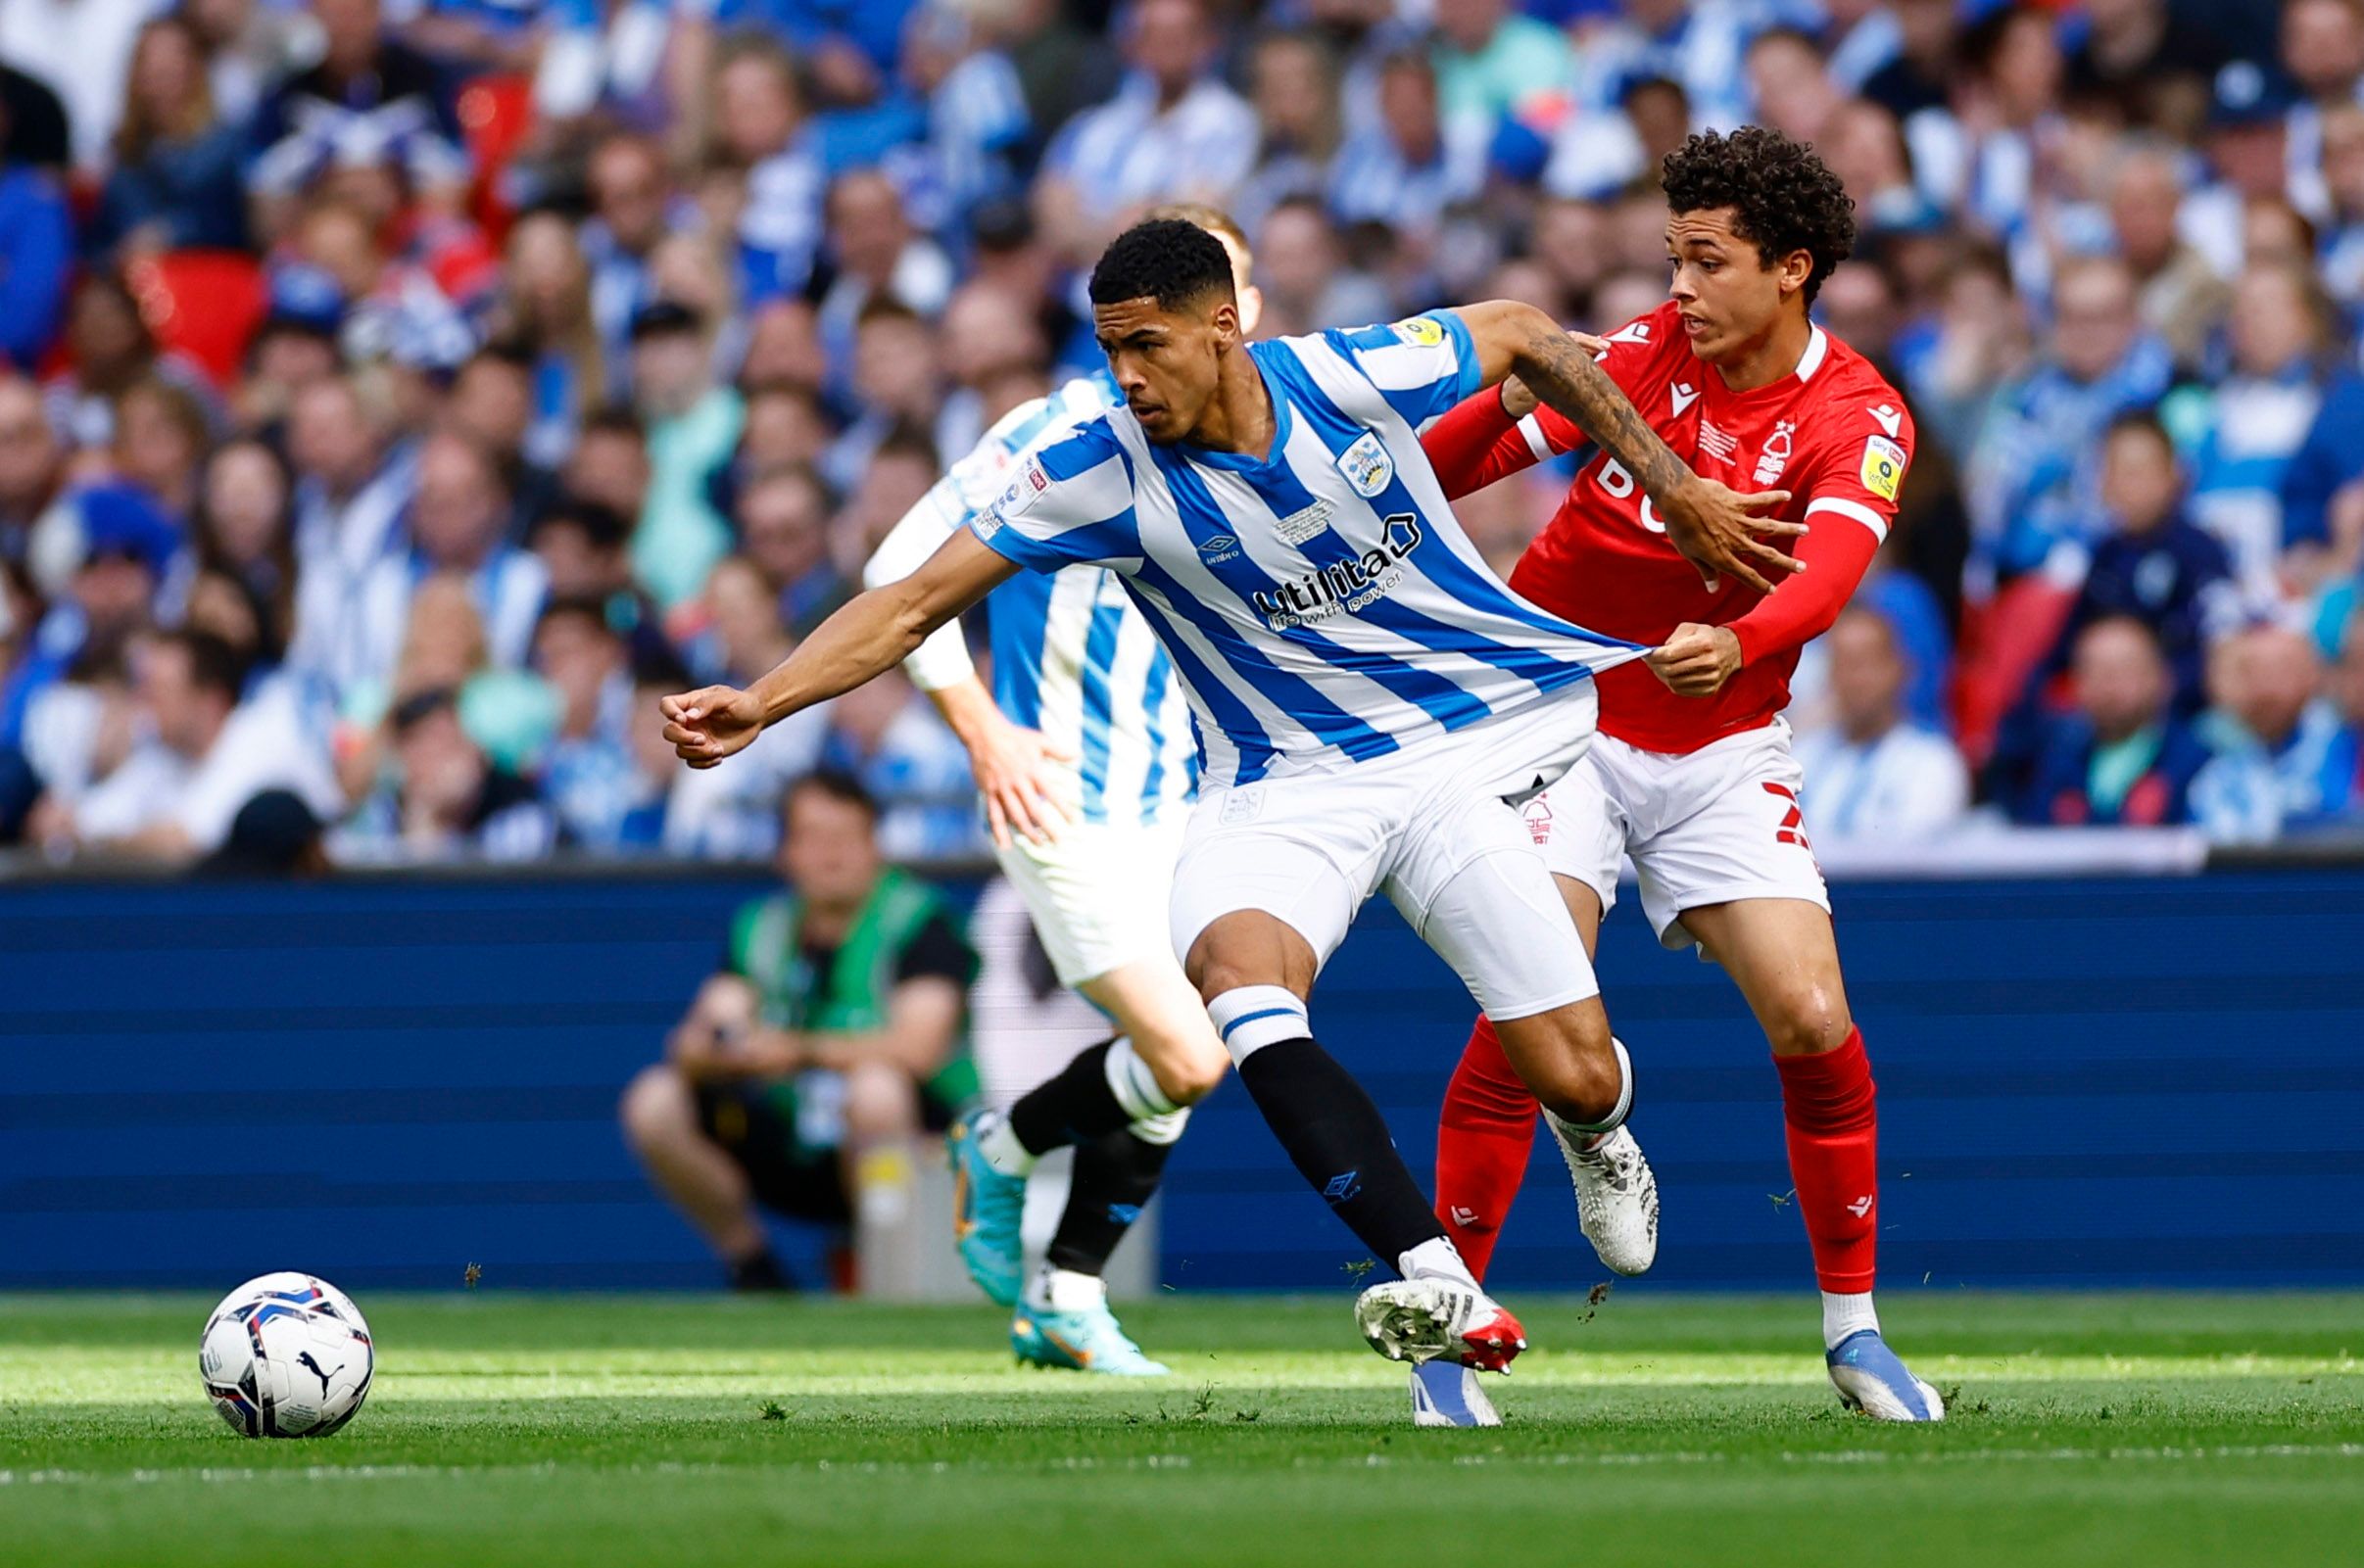 Soccer Football - Championship Play-Off Final - Huddersfield Town v Nottingham Forest - Wembley Stadium, London, Britain - May 29, 2022 Huddersfield Town's Levi Samuels Colwill in action with Nottingham Forest's Brennan Johnson Action Images via Reuters/Andrew Boyers